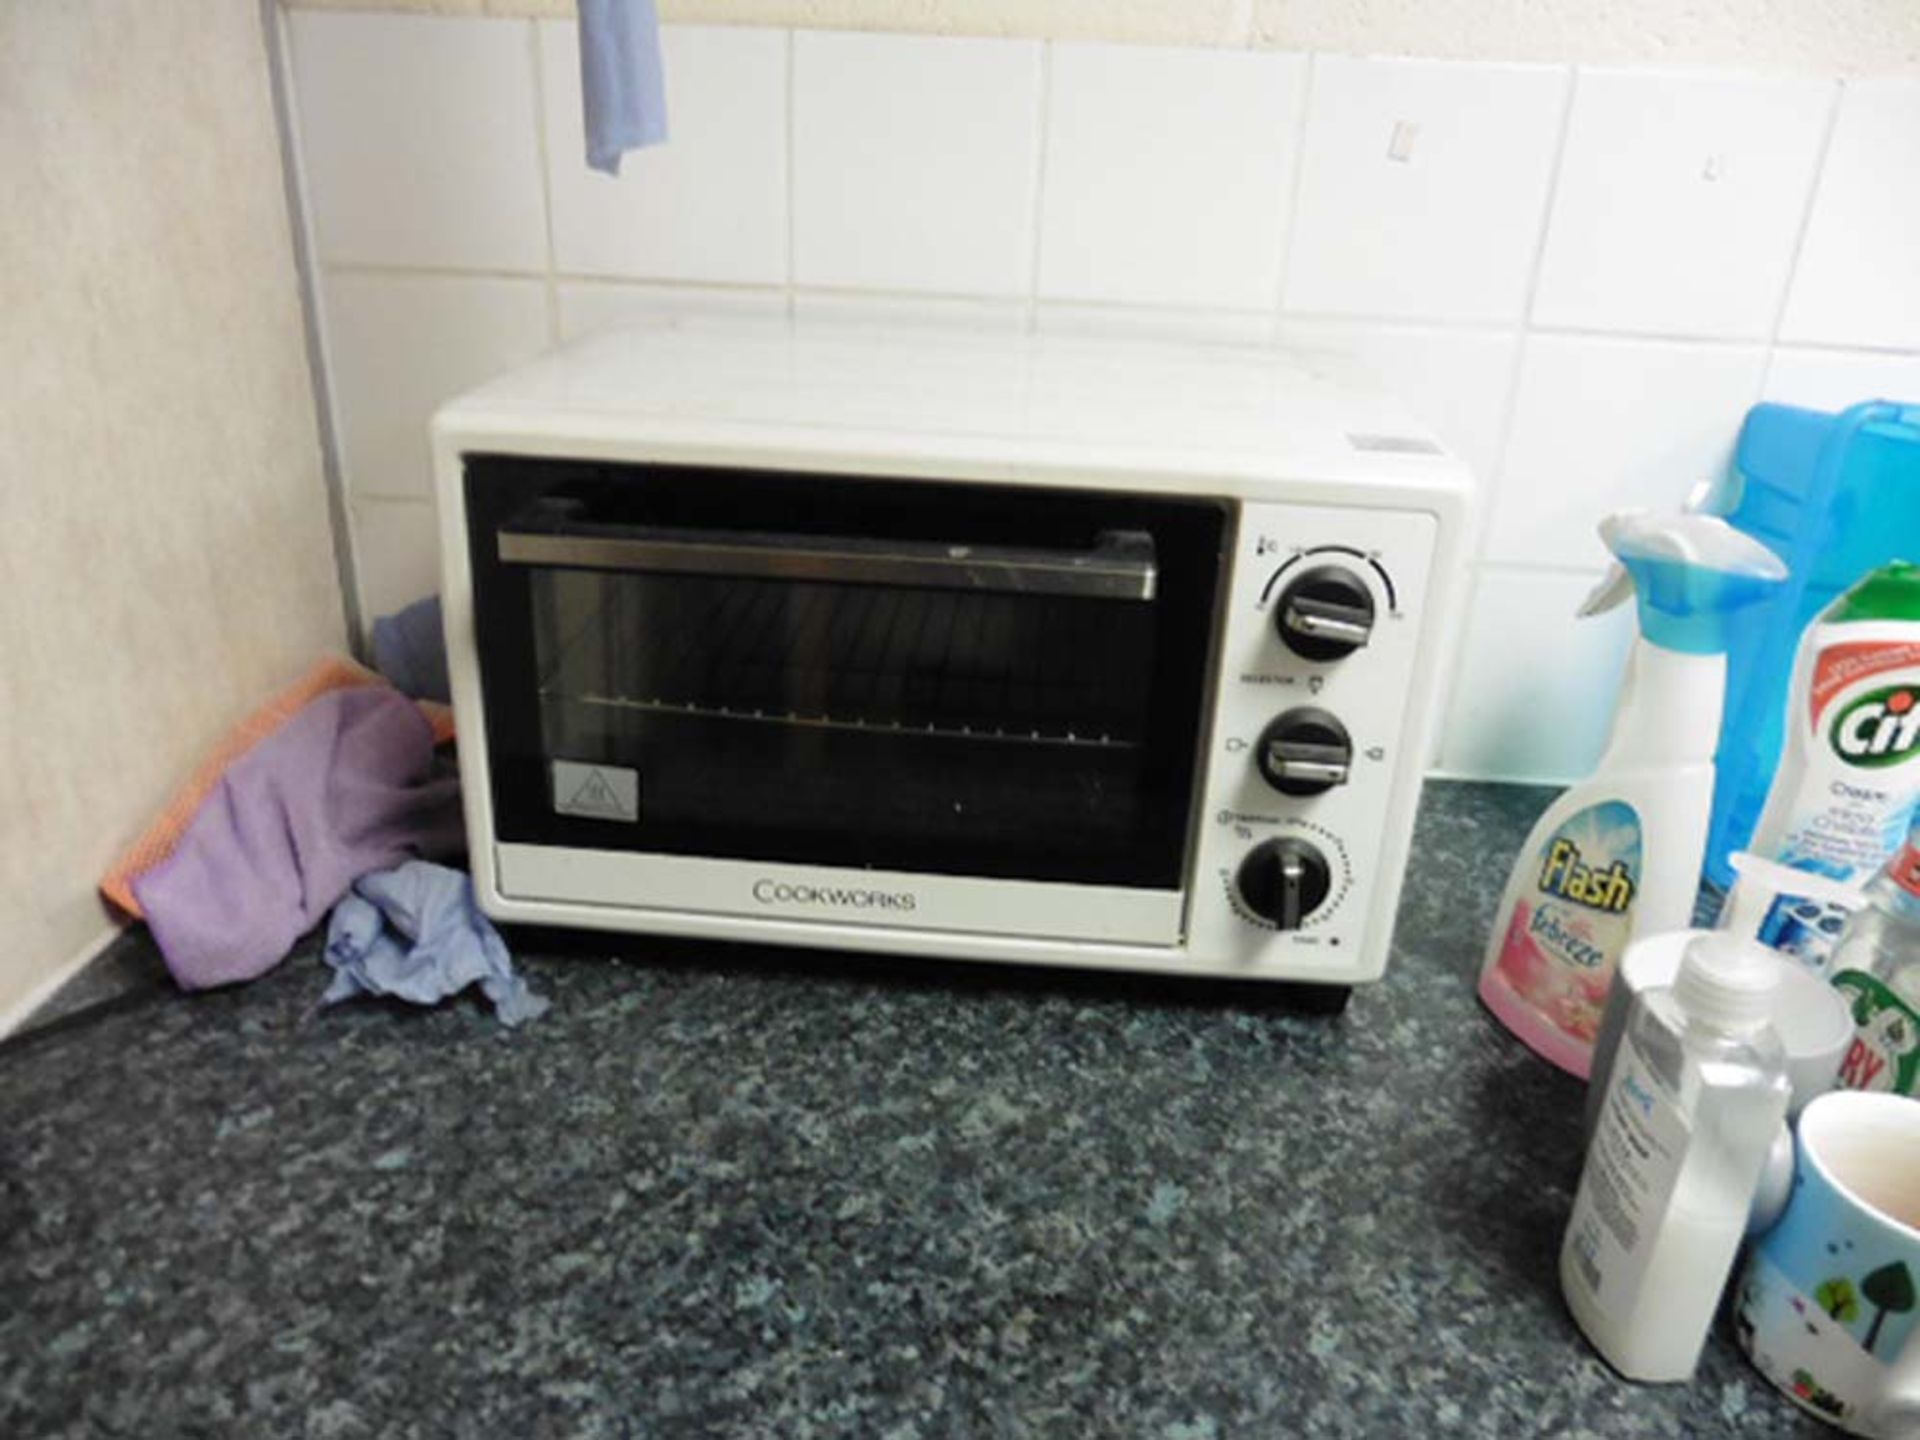 Loose contents of the kitchen including Daewoo microwave, Zanussi fridge freezer, cookworks oven - Image 2 of 2